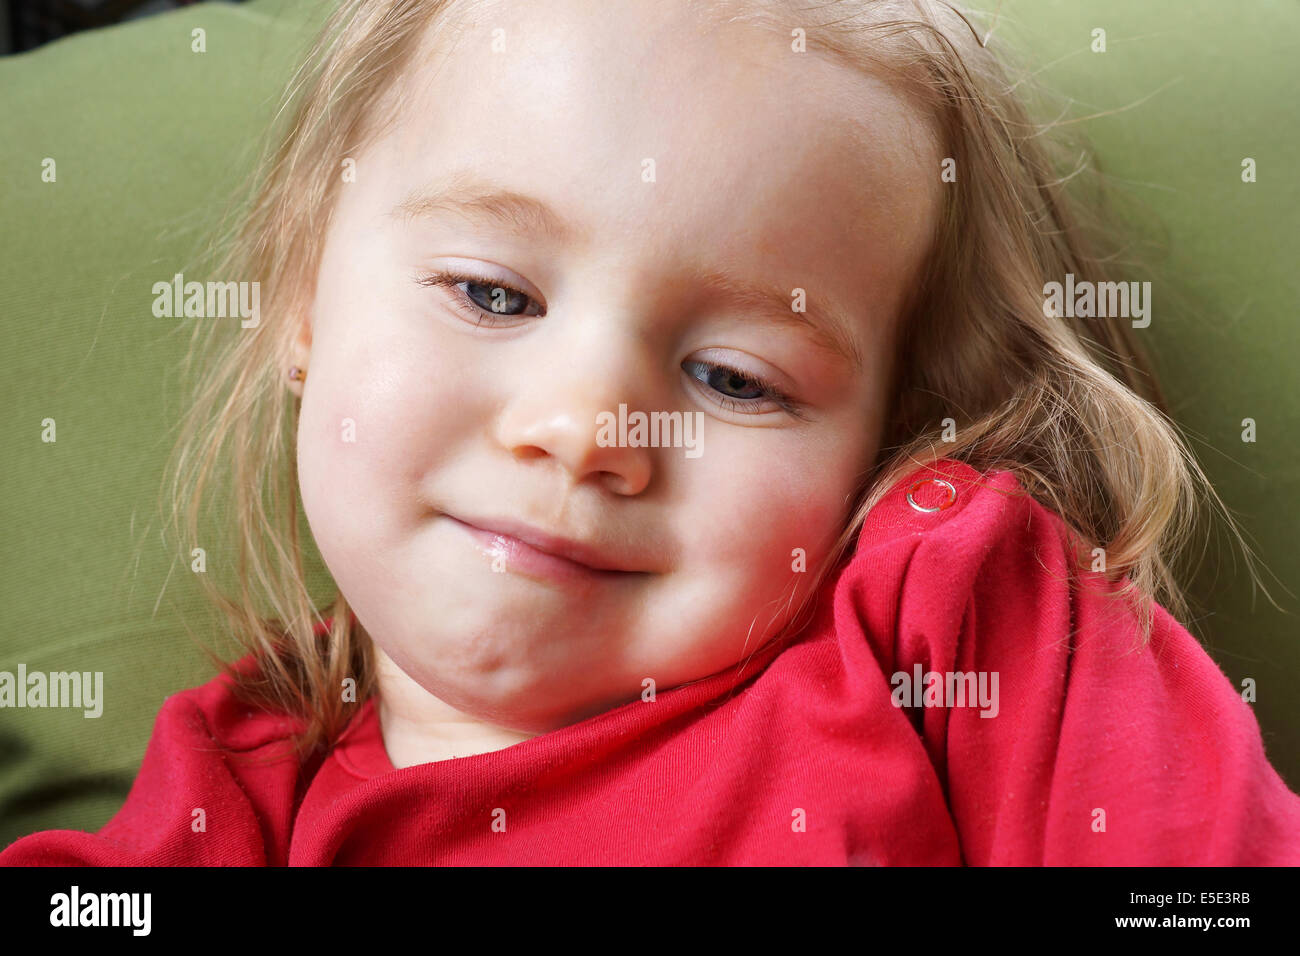 Portrait of a sleepy, smiling, blond baby girl Stock Photo